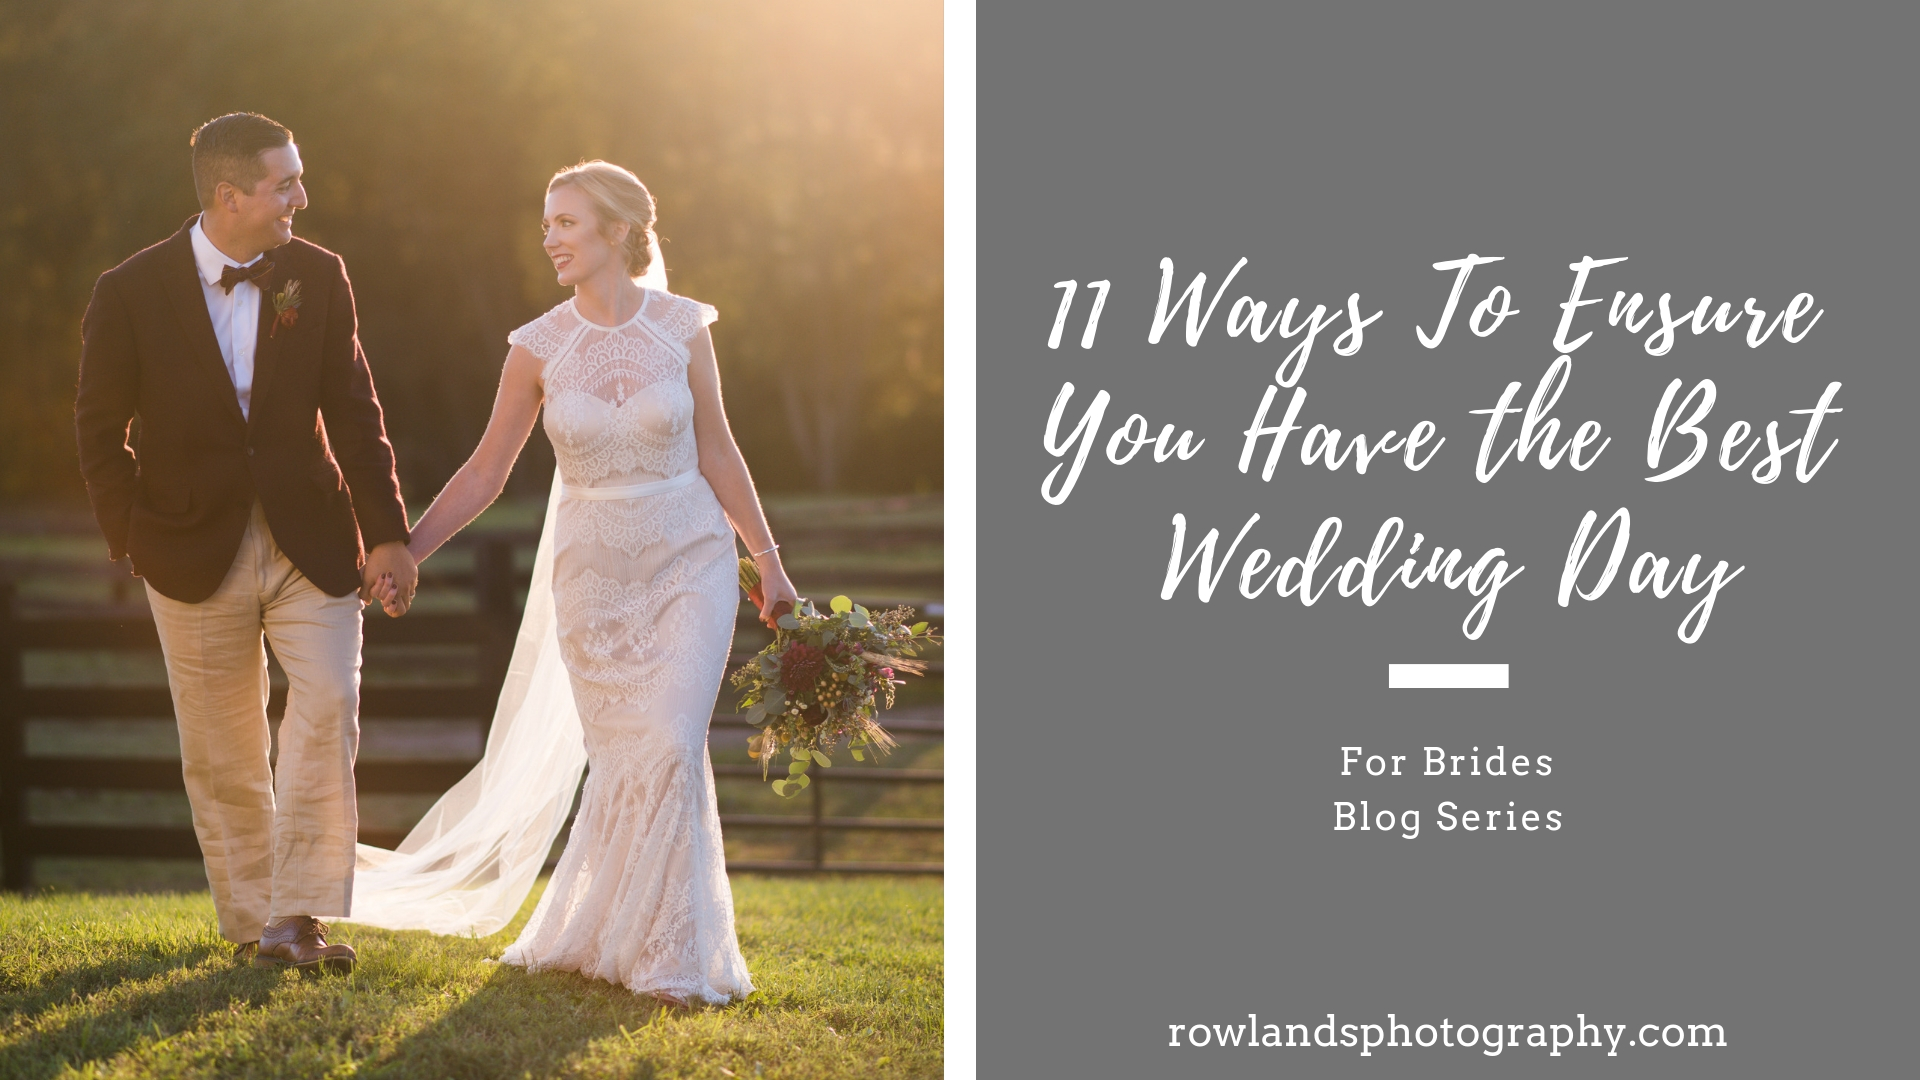 virginia wedding photographers share how to have best wedding day